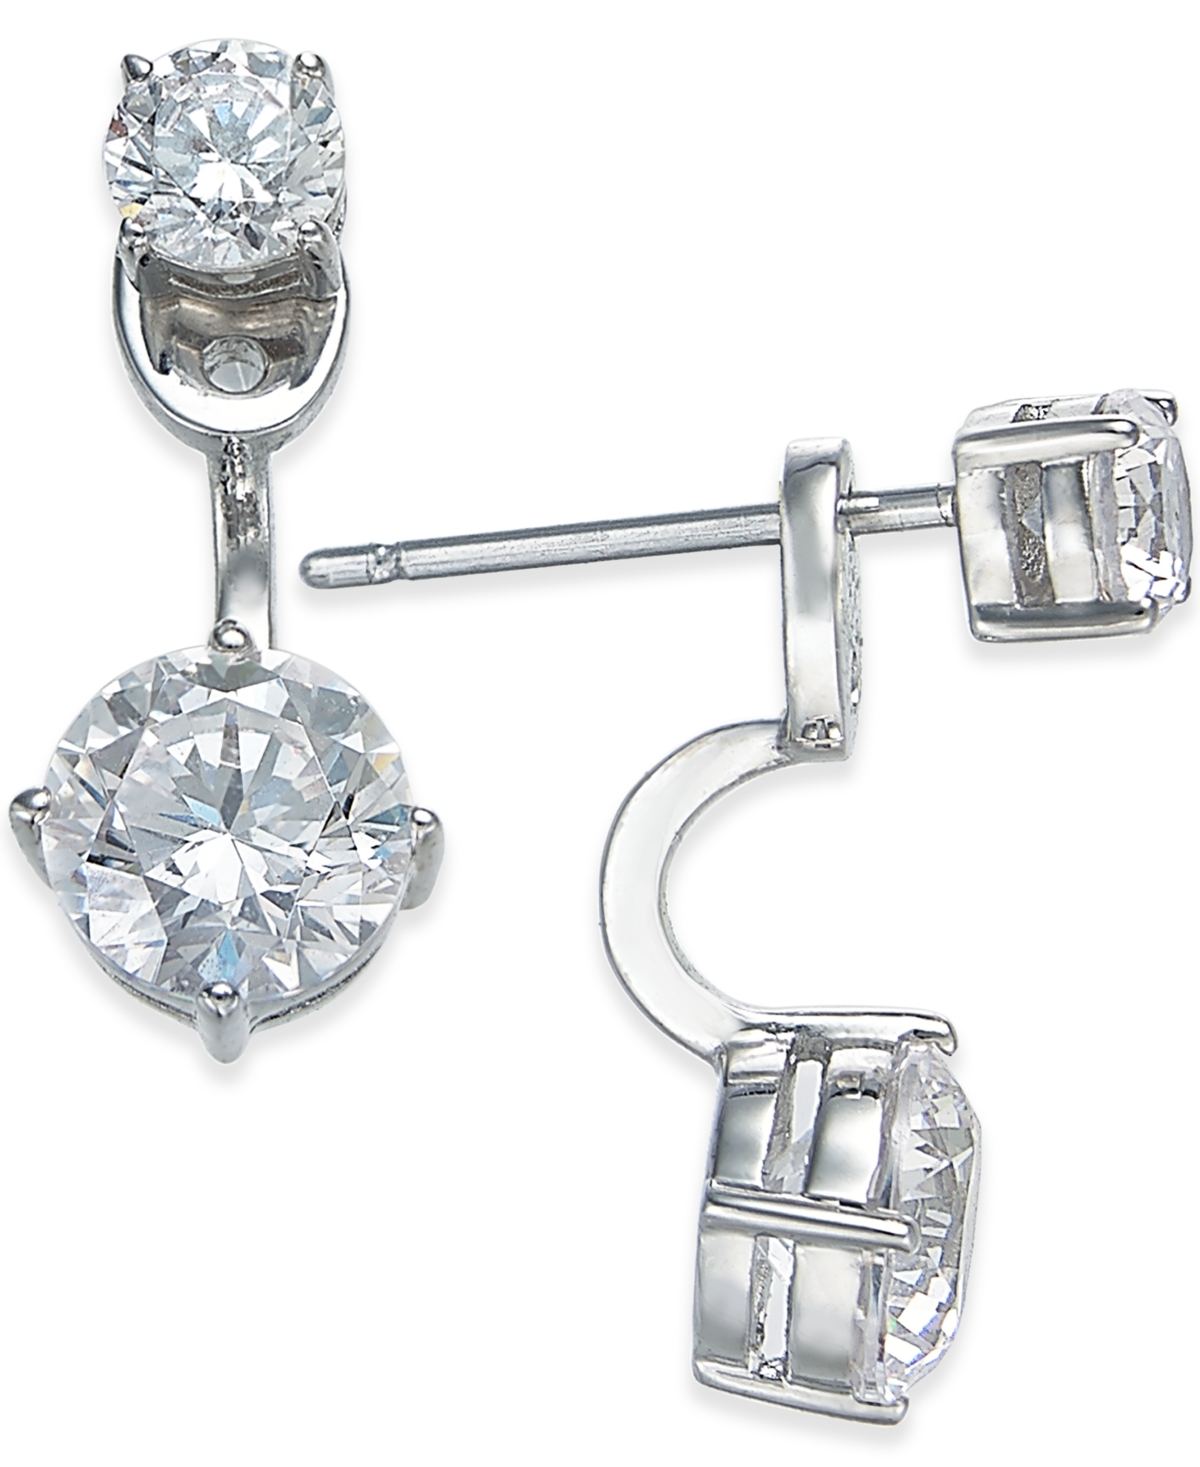 Silver-Tone Double Crystal Front Back Earrings, Created for Macy's - Silver